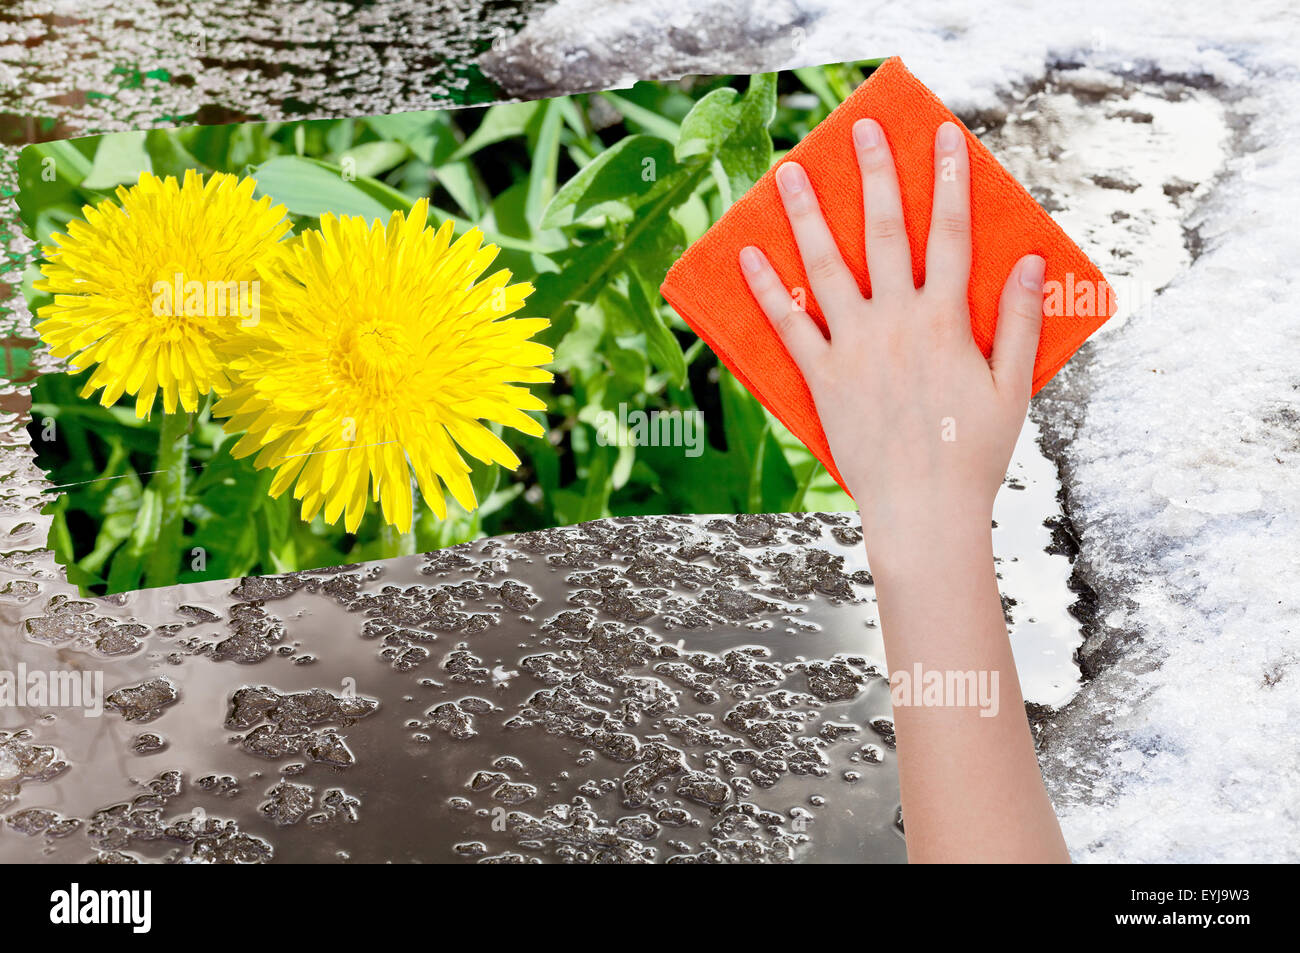 season concept - hand deletes melting snow by orange cloth from image and yellow dandelion flowers are appearing Stock Photo